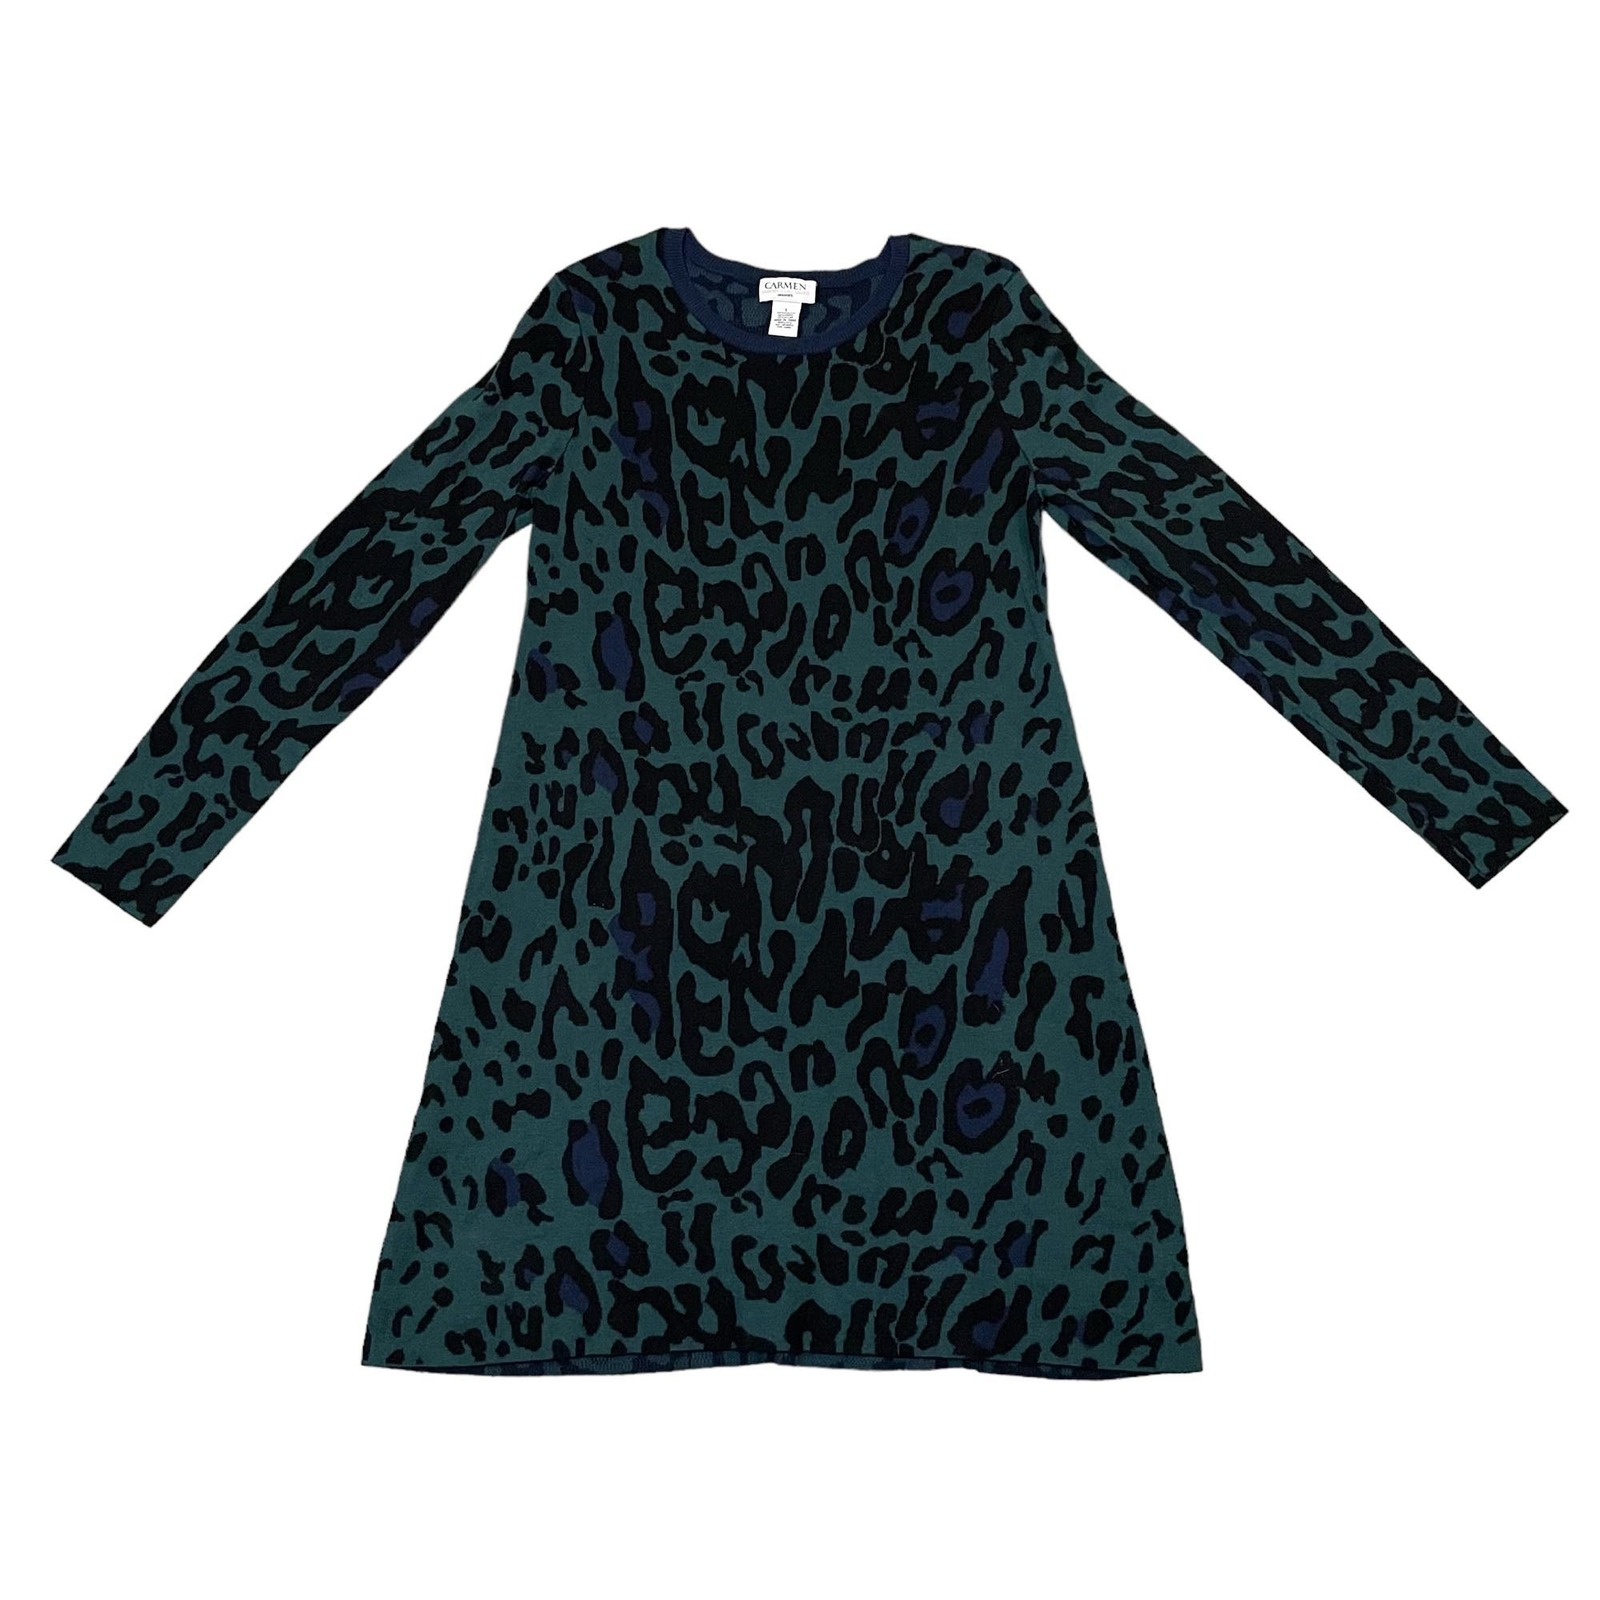 Primary image for Carmen Marc Valvo Long Sleeve Animal Print Sweater Dress Green Blue - Size Large